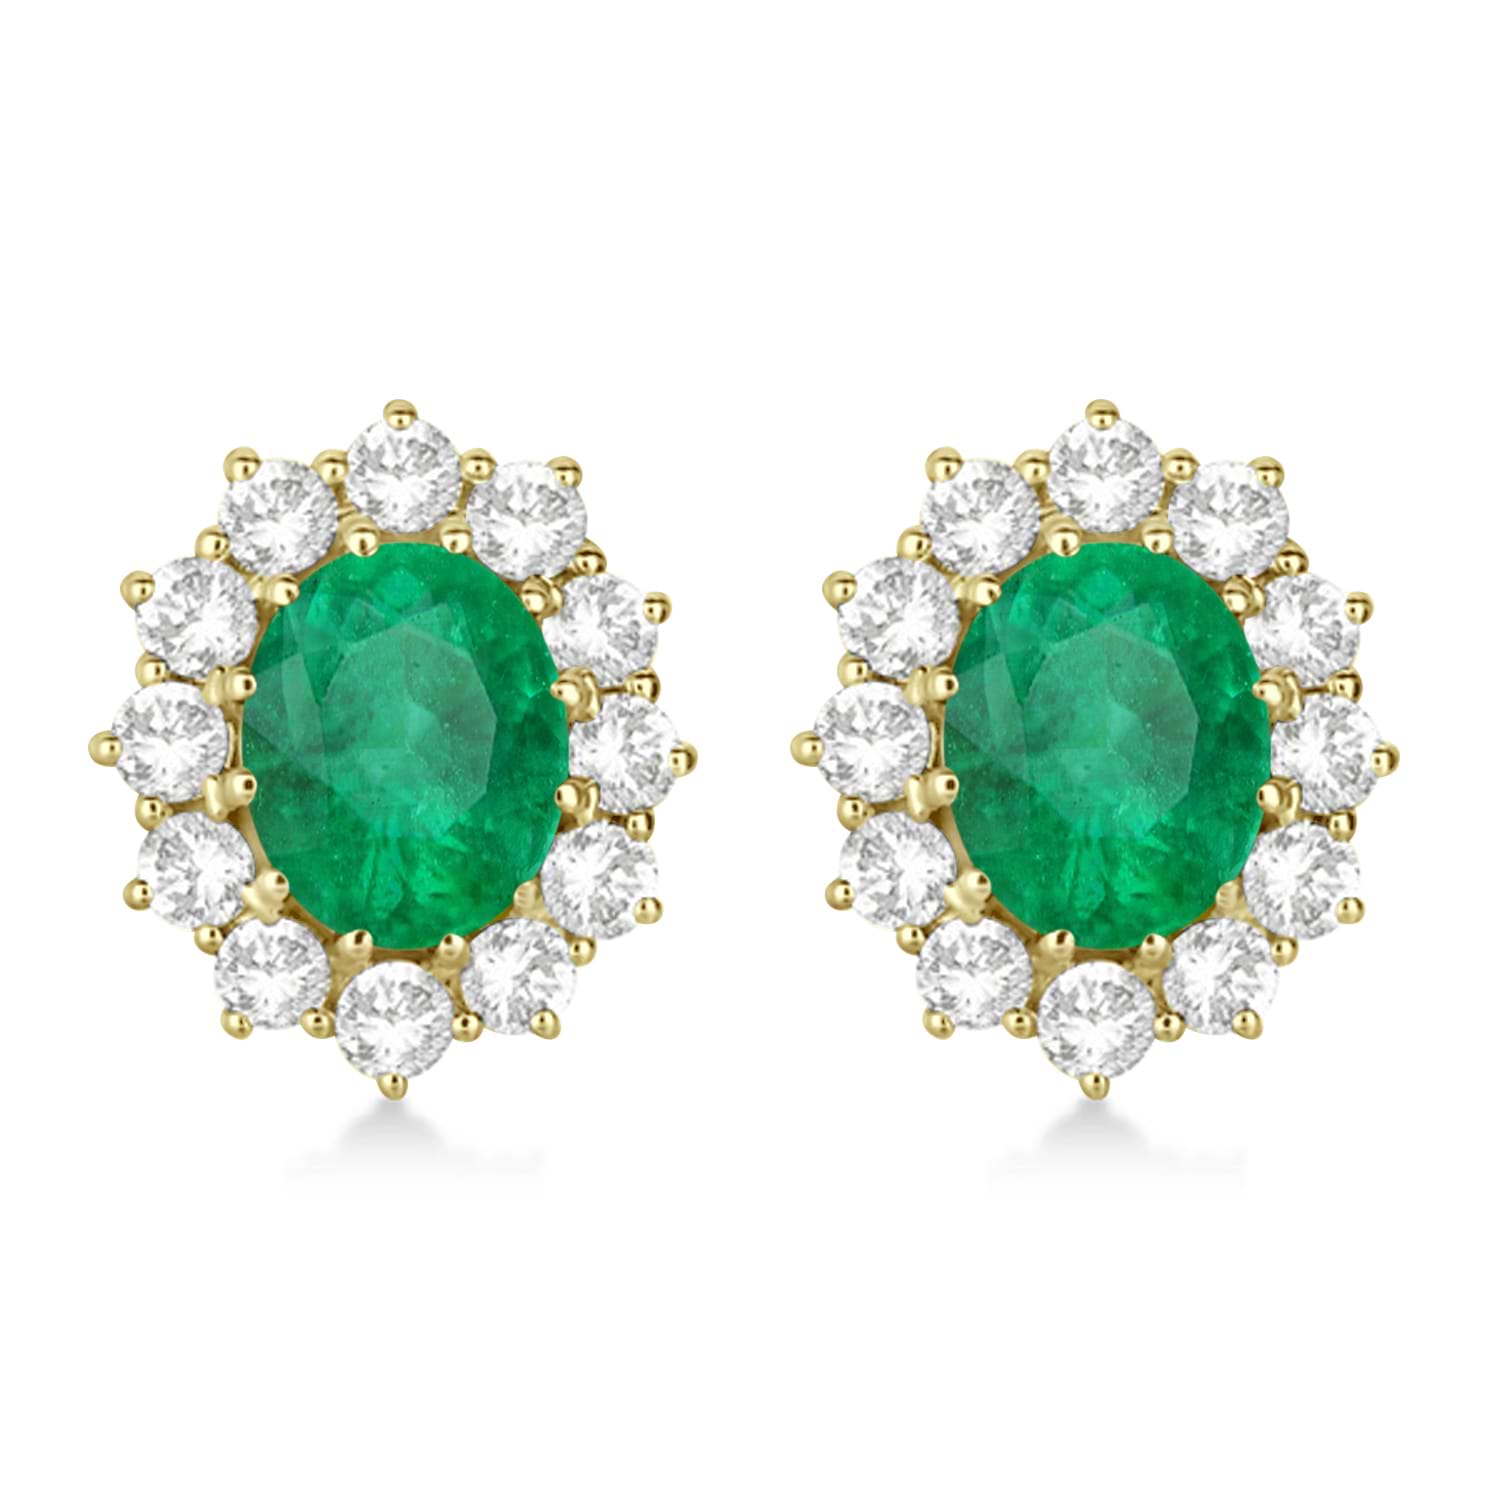 Oval Lab Emerald and Diamond Earrings 14k Yellow Gold (7.10ctw)